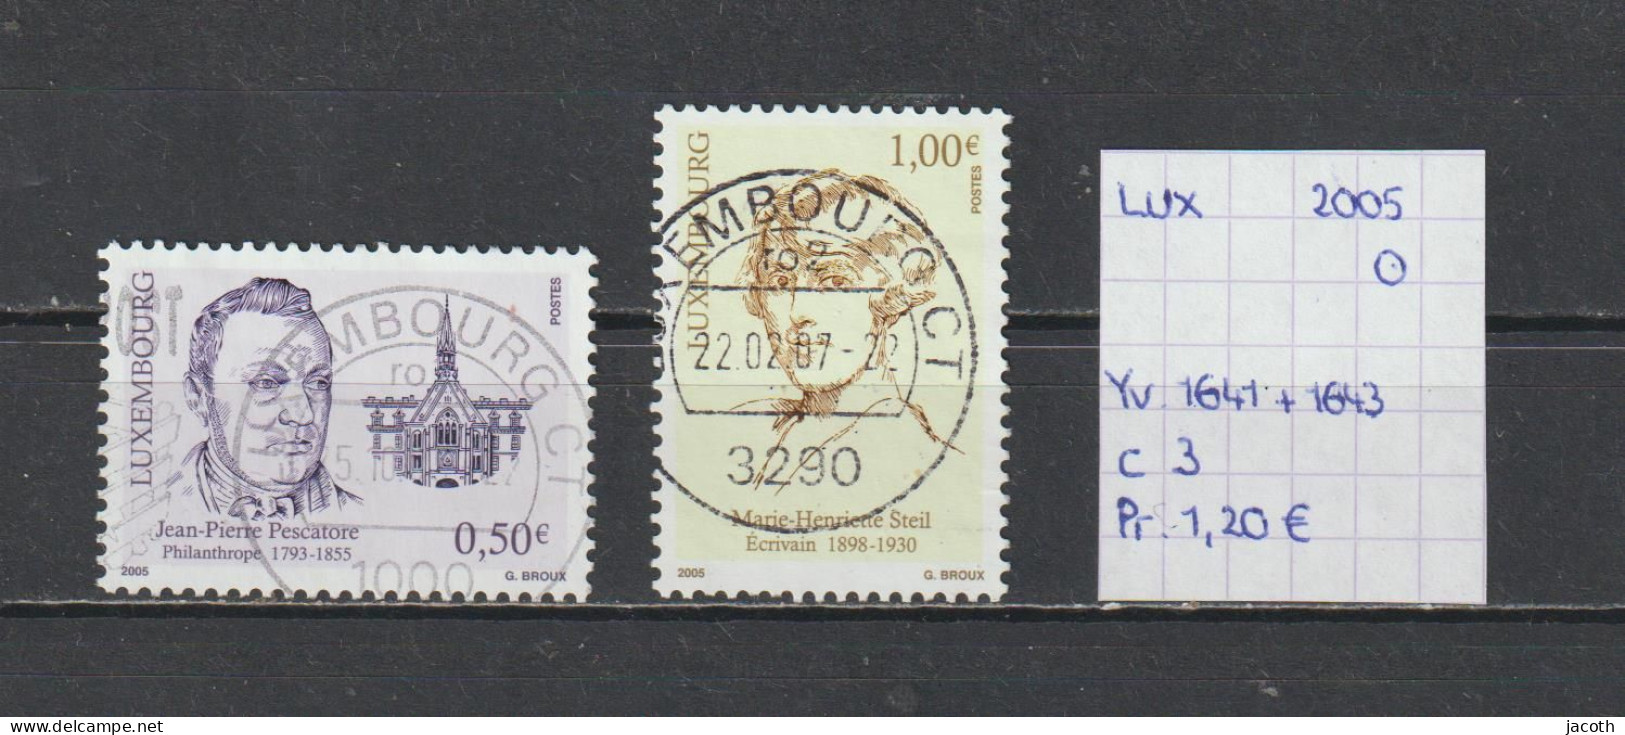 (TJ) Luxembourg 2005 - YT 1641 + 1643 (gest./obl./used) - Usati